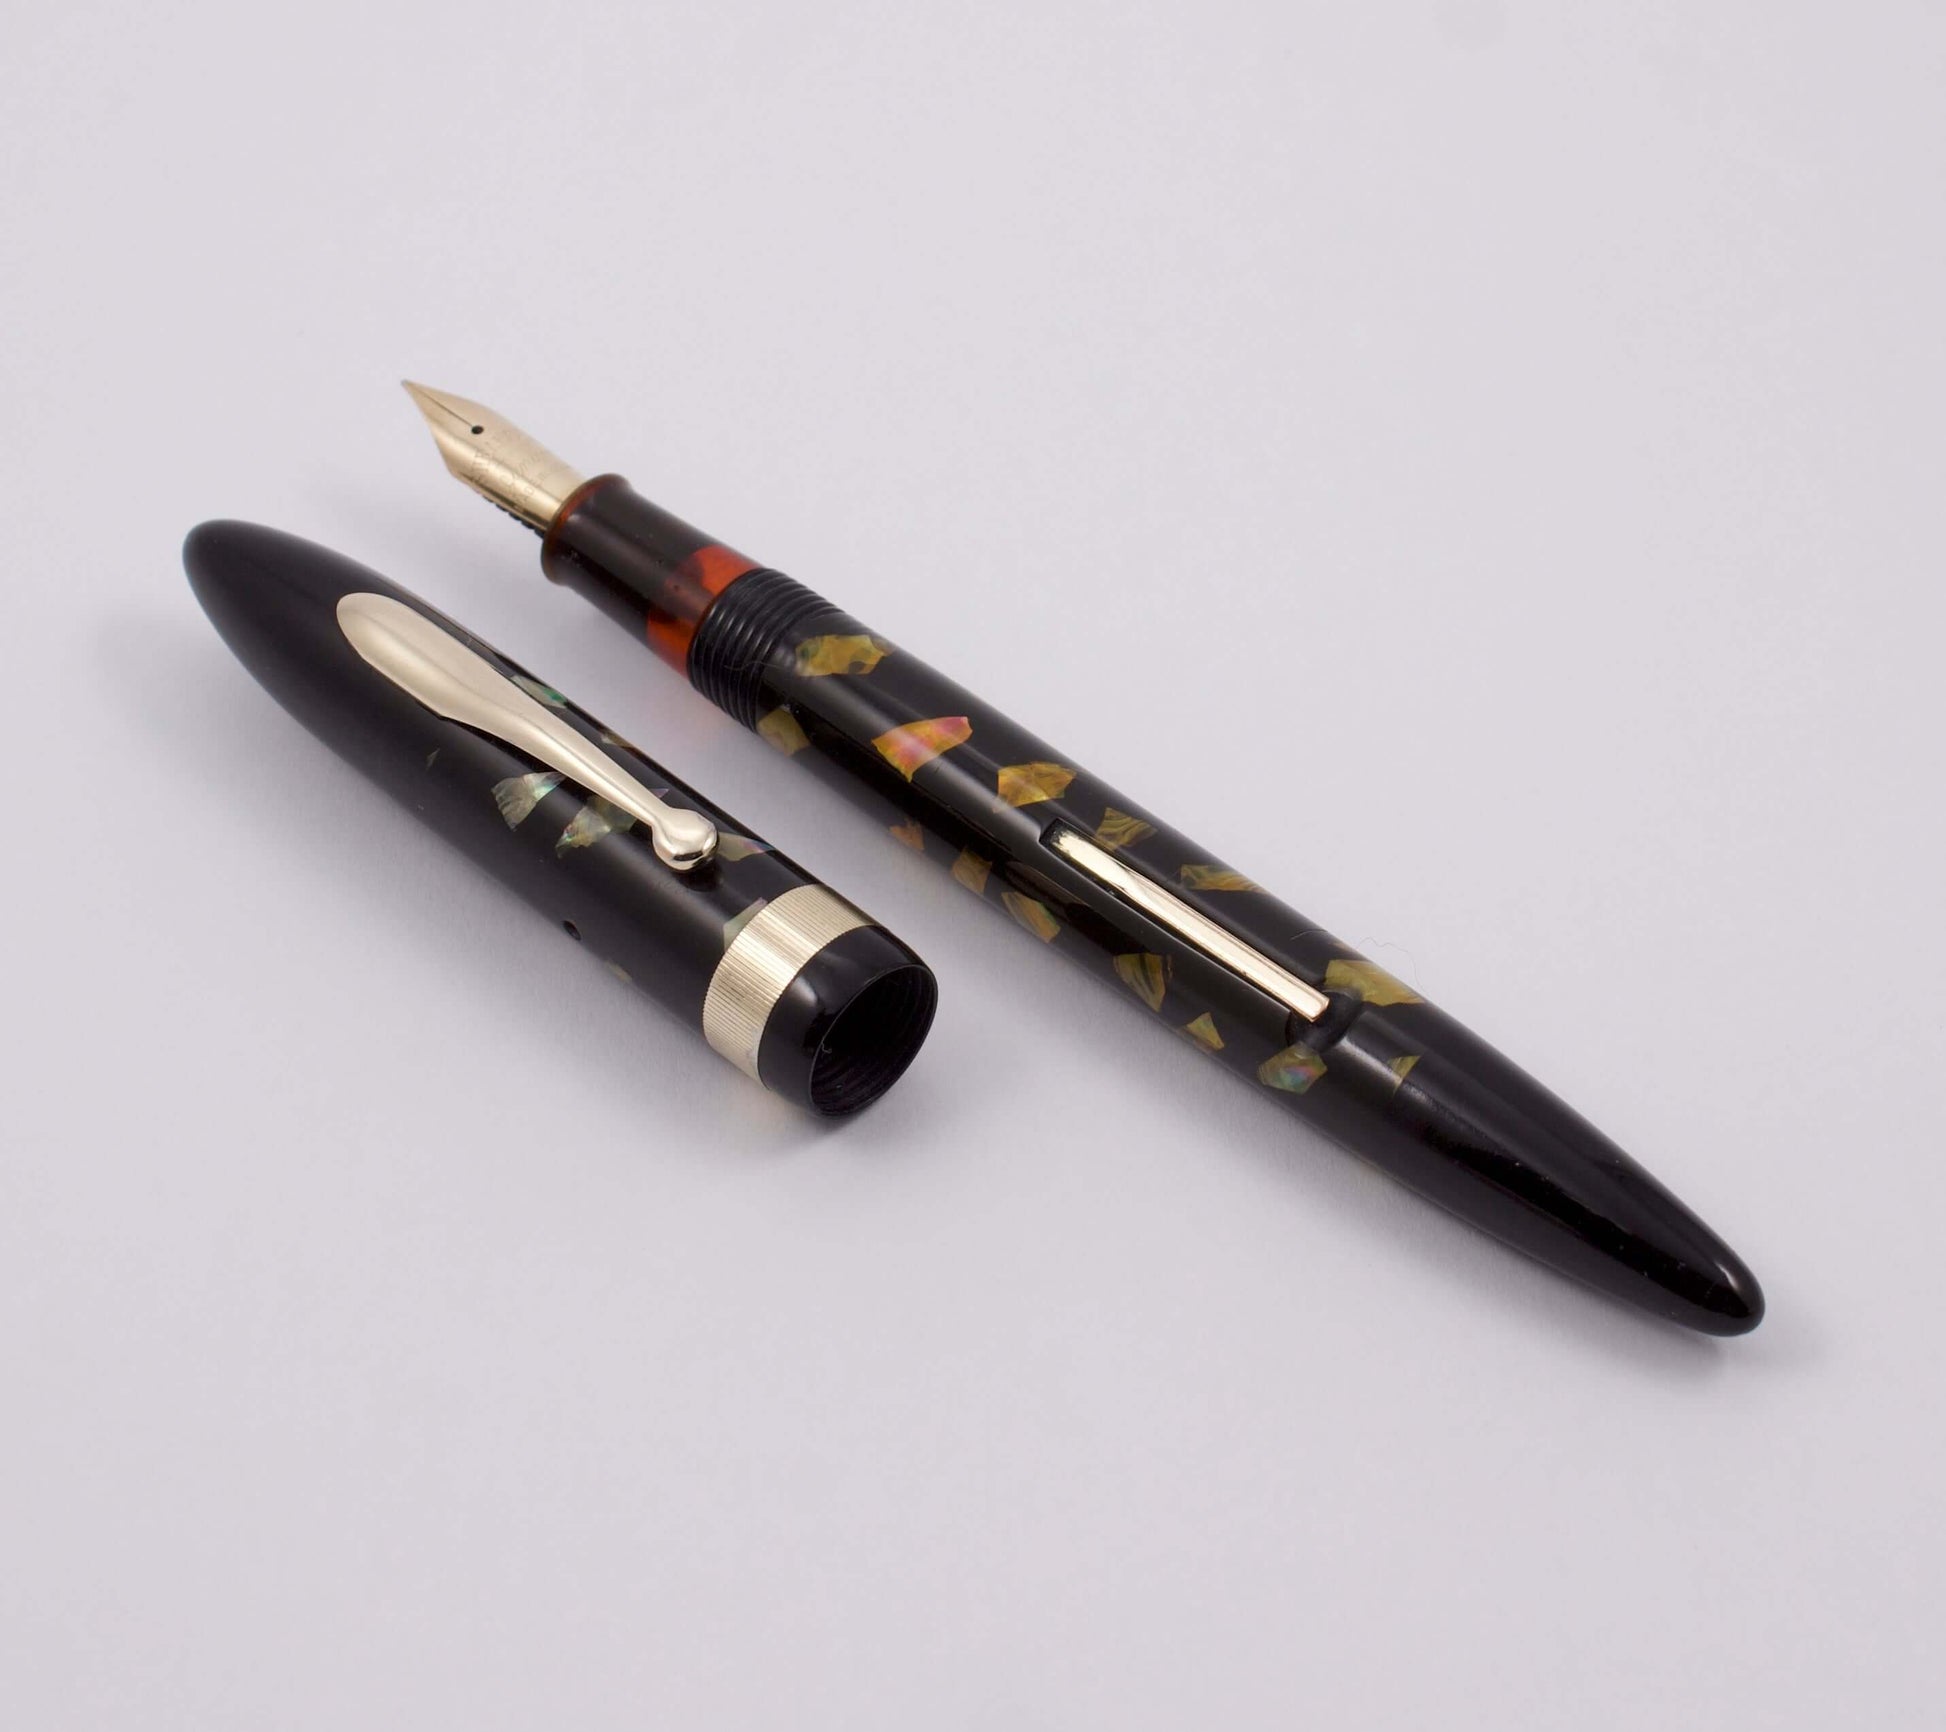 Sheaffer Fountain Pen, Ebonized Pearl, Wide Milled Cap, Lever Fill, 14K Gold Junior Medium Nib, Pen and Pencil Set Type: Lever Filling Fountain Pen and Mechanical Pencil Product Name: Sheaffer Length: 5 1/4 Filling System: Lever filling with a new sac. Co